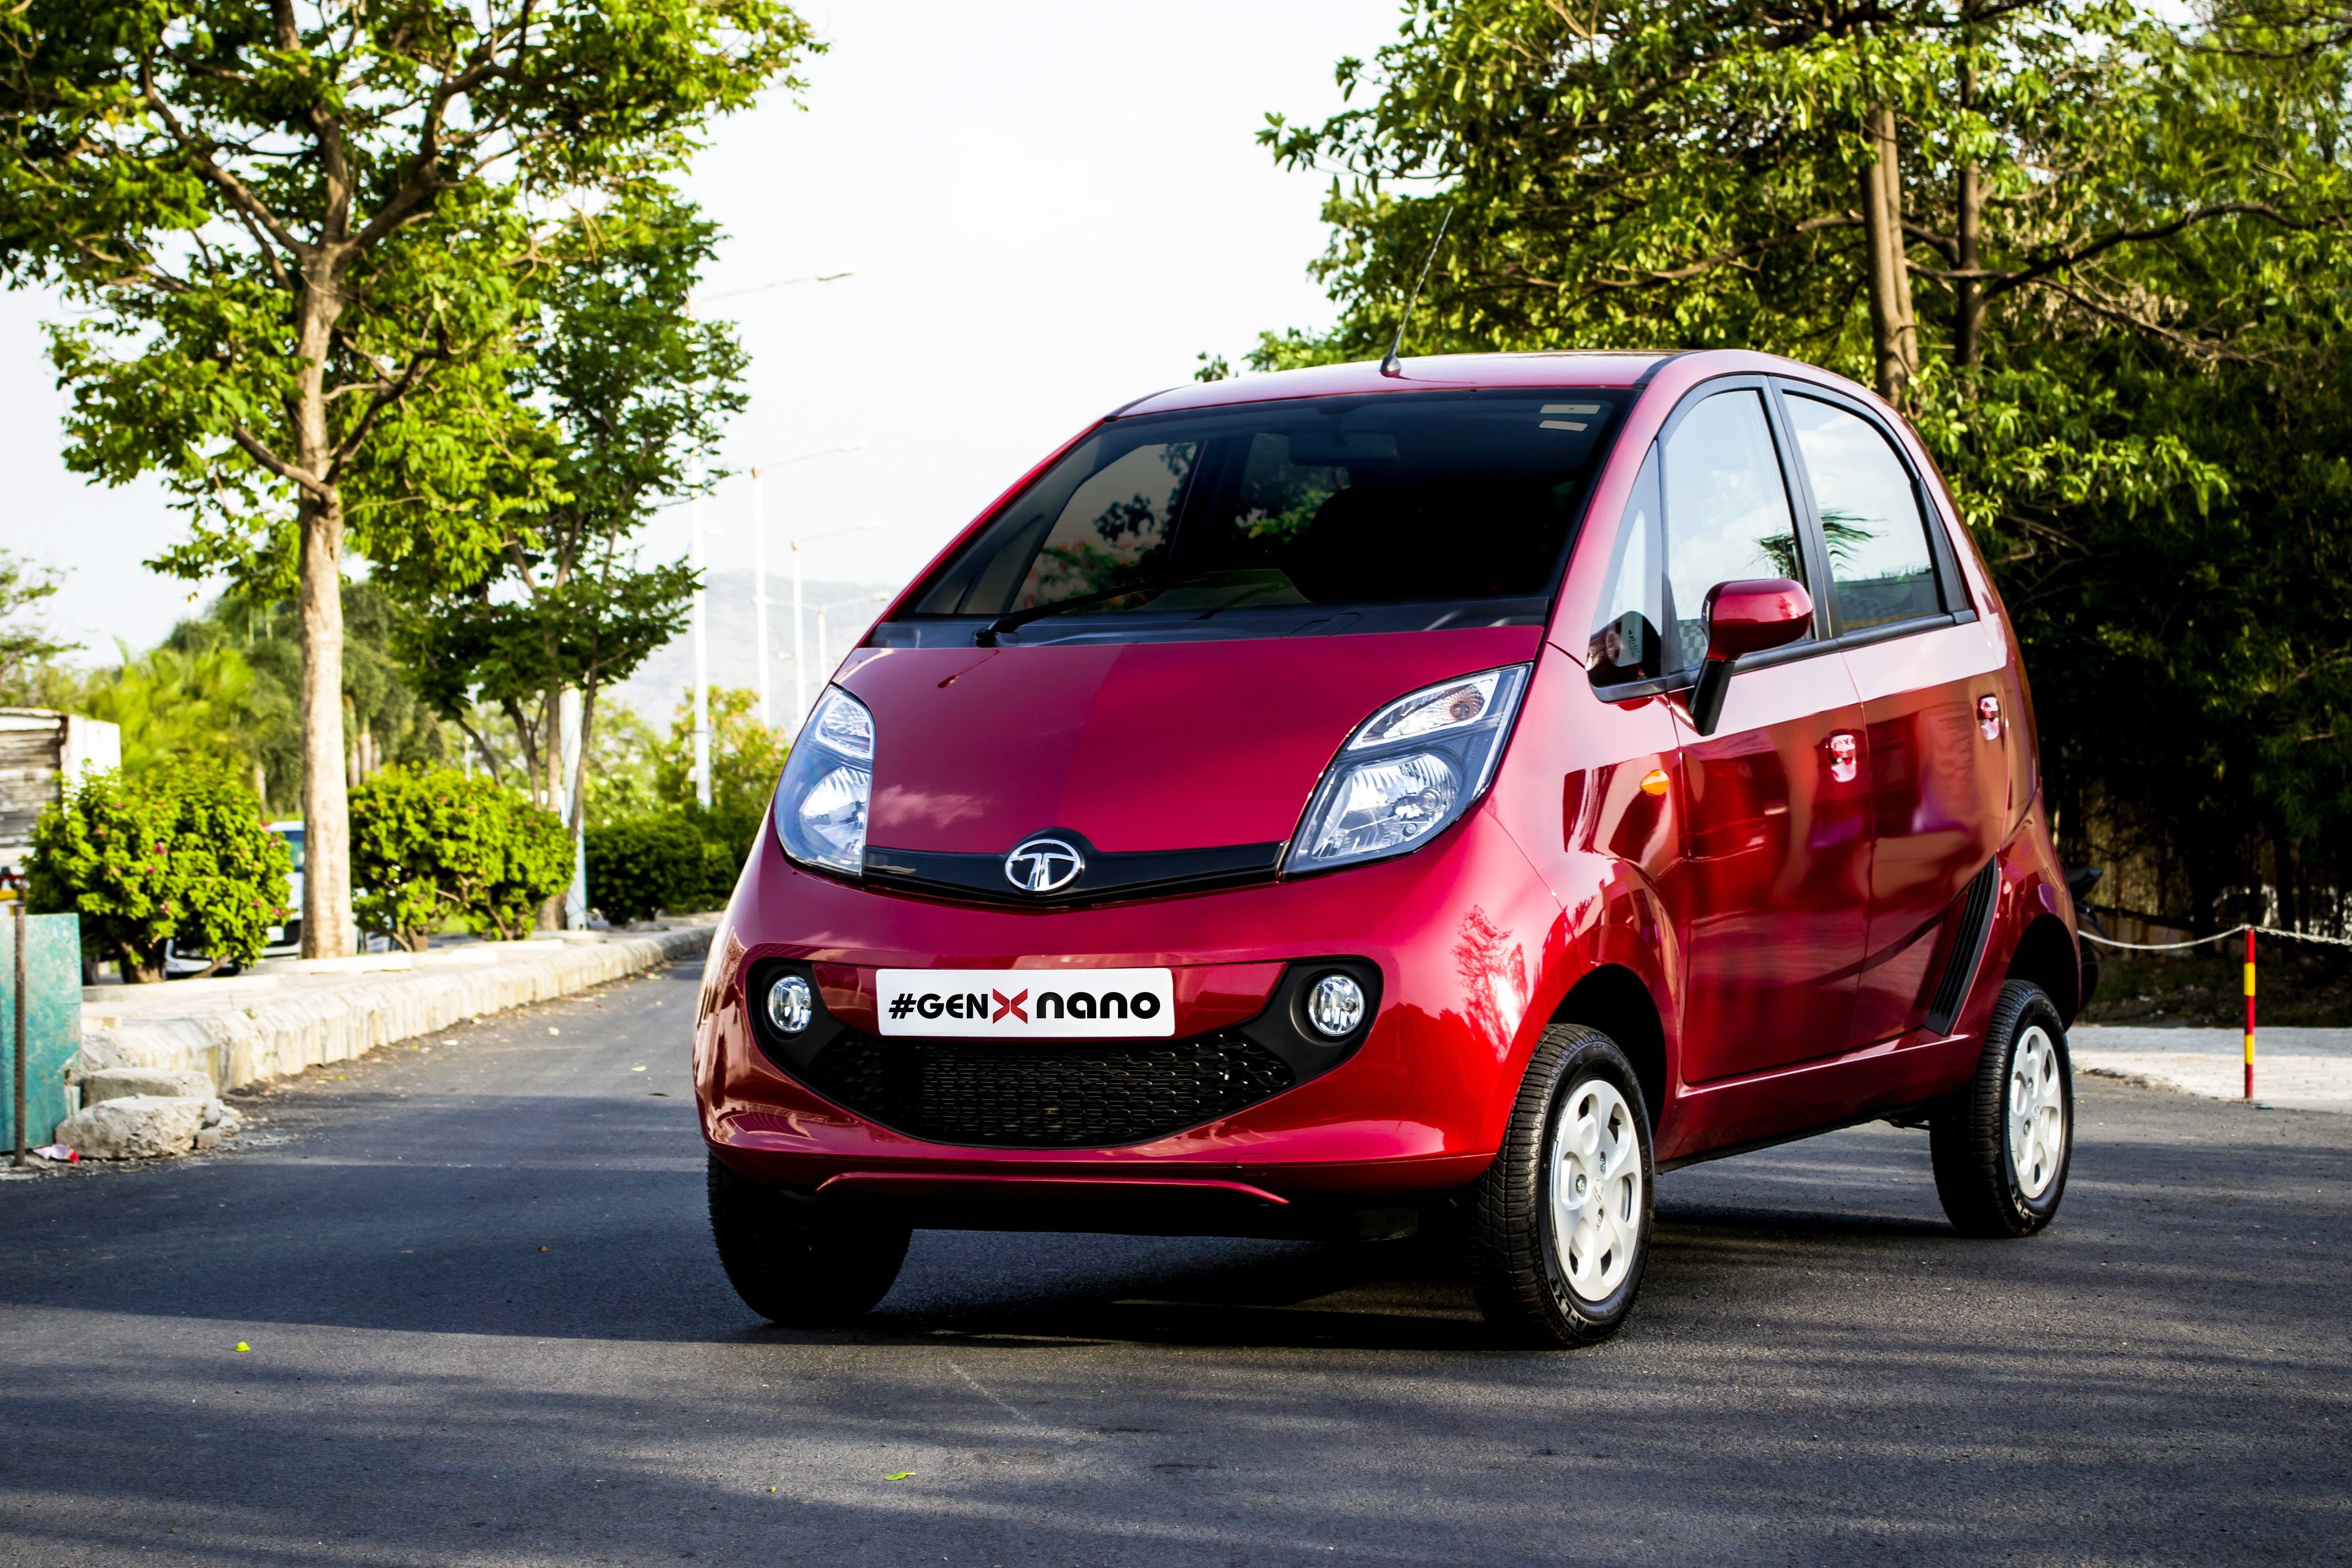 Lowest Maintenance Cars in India - the Tata Nano is among cheapest cars to maintain in india